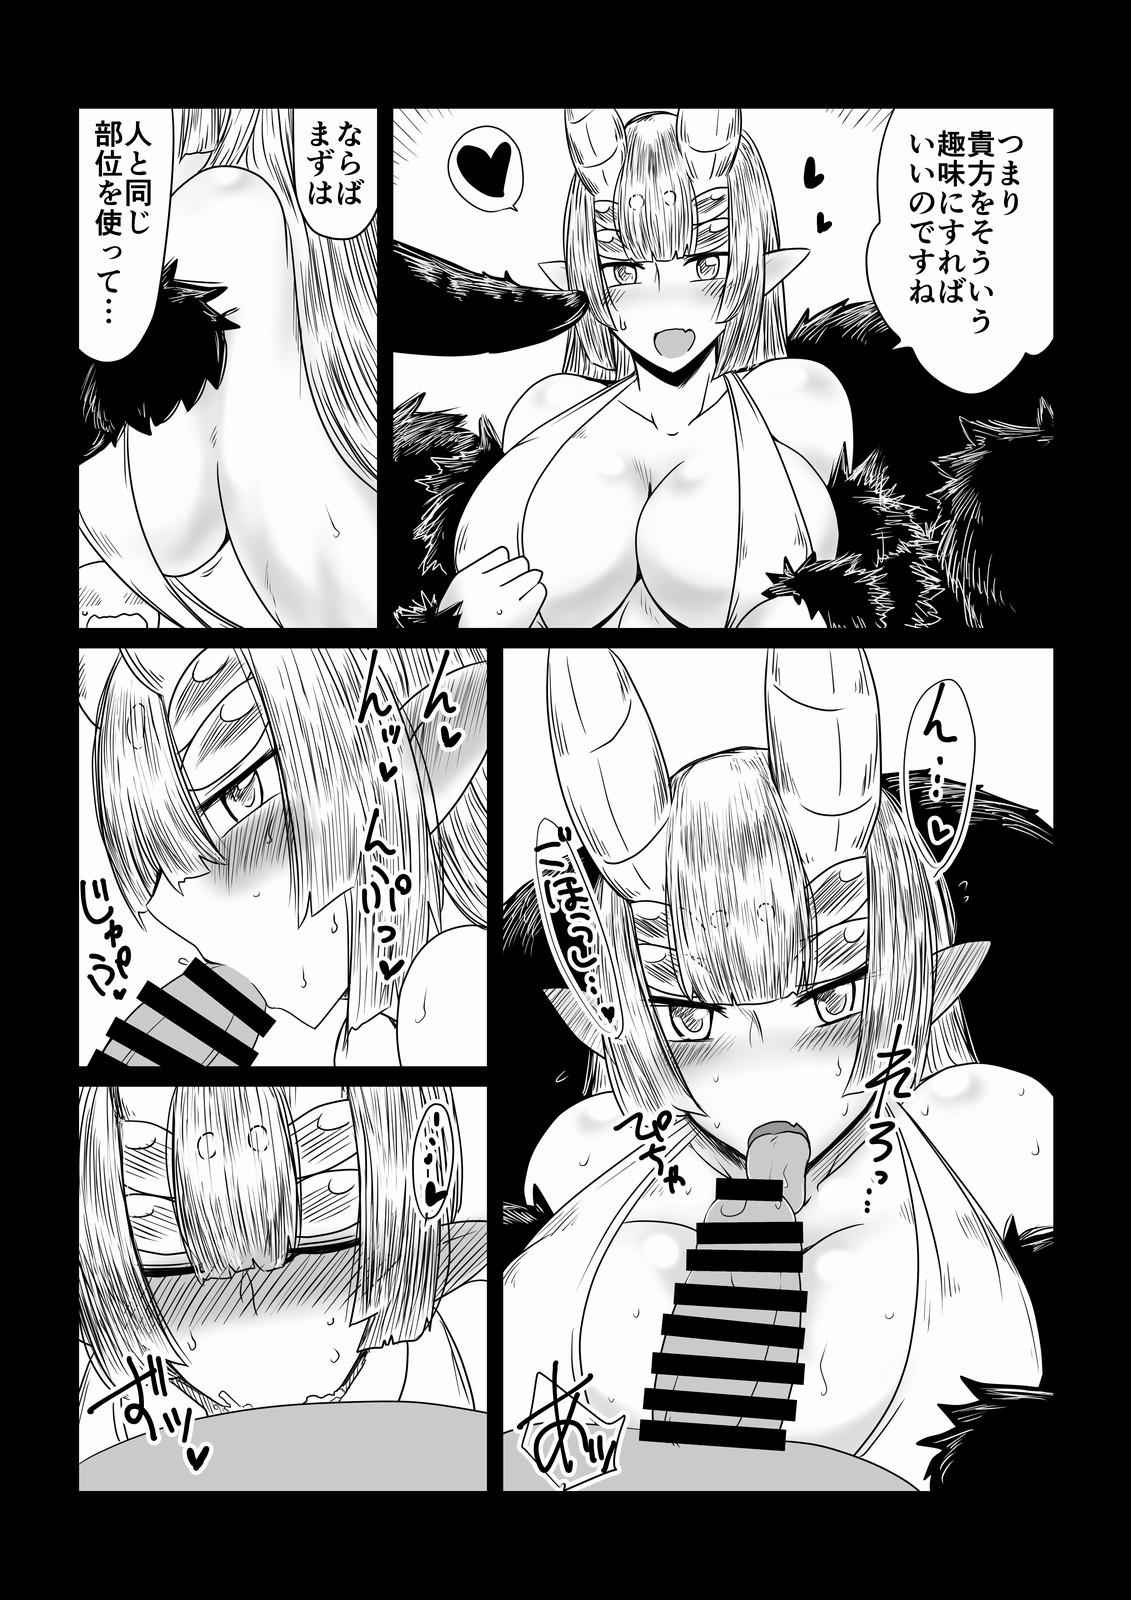 Best Blow Jobs Ever Kumo no Ohime-sama. - Original Spying - Page 5